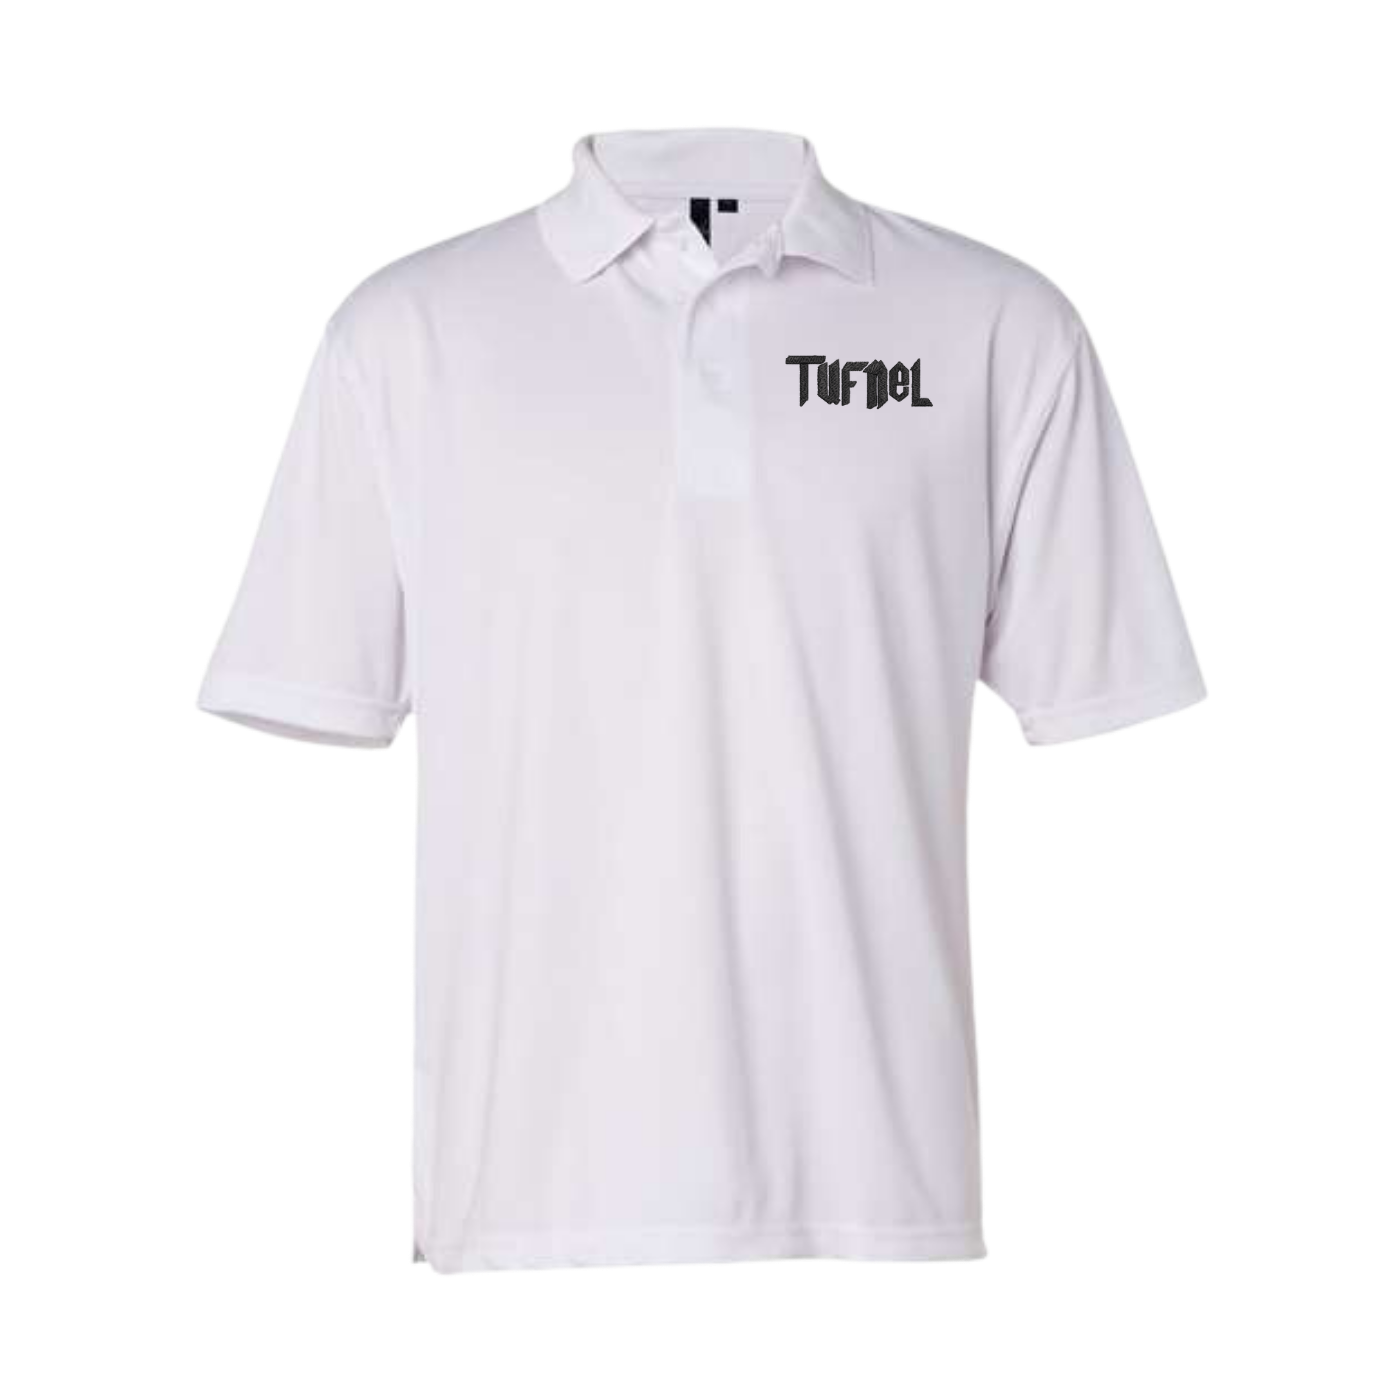 Tufnel Men's Embroidered Polo Shirt